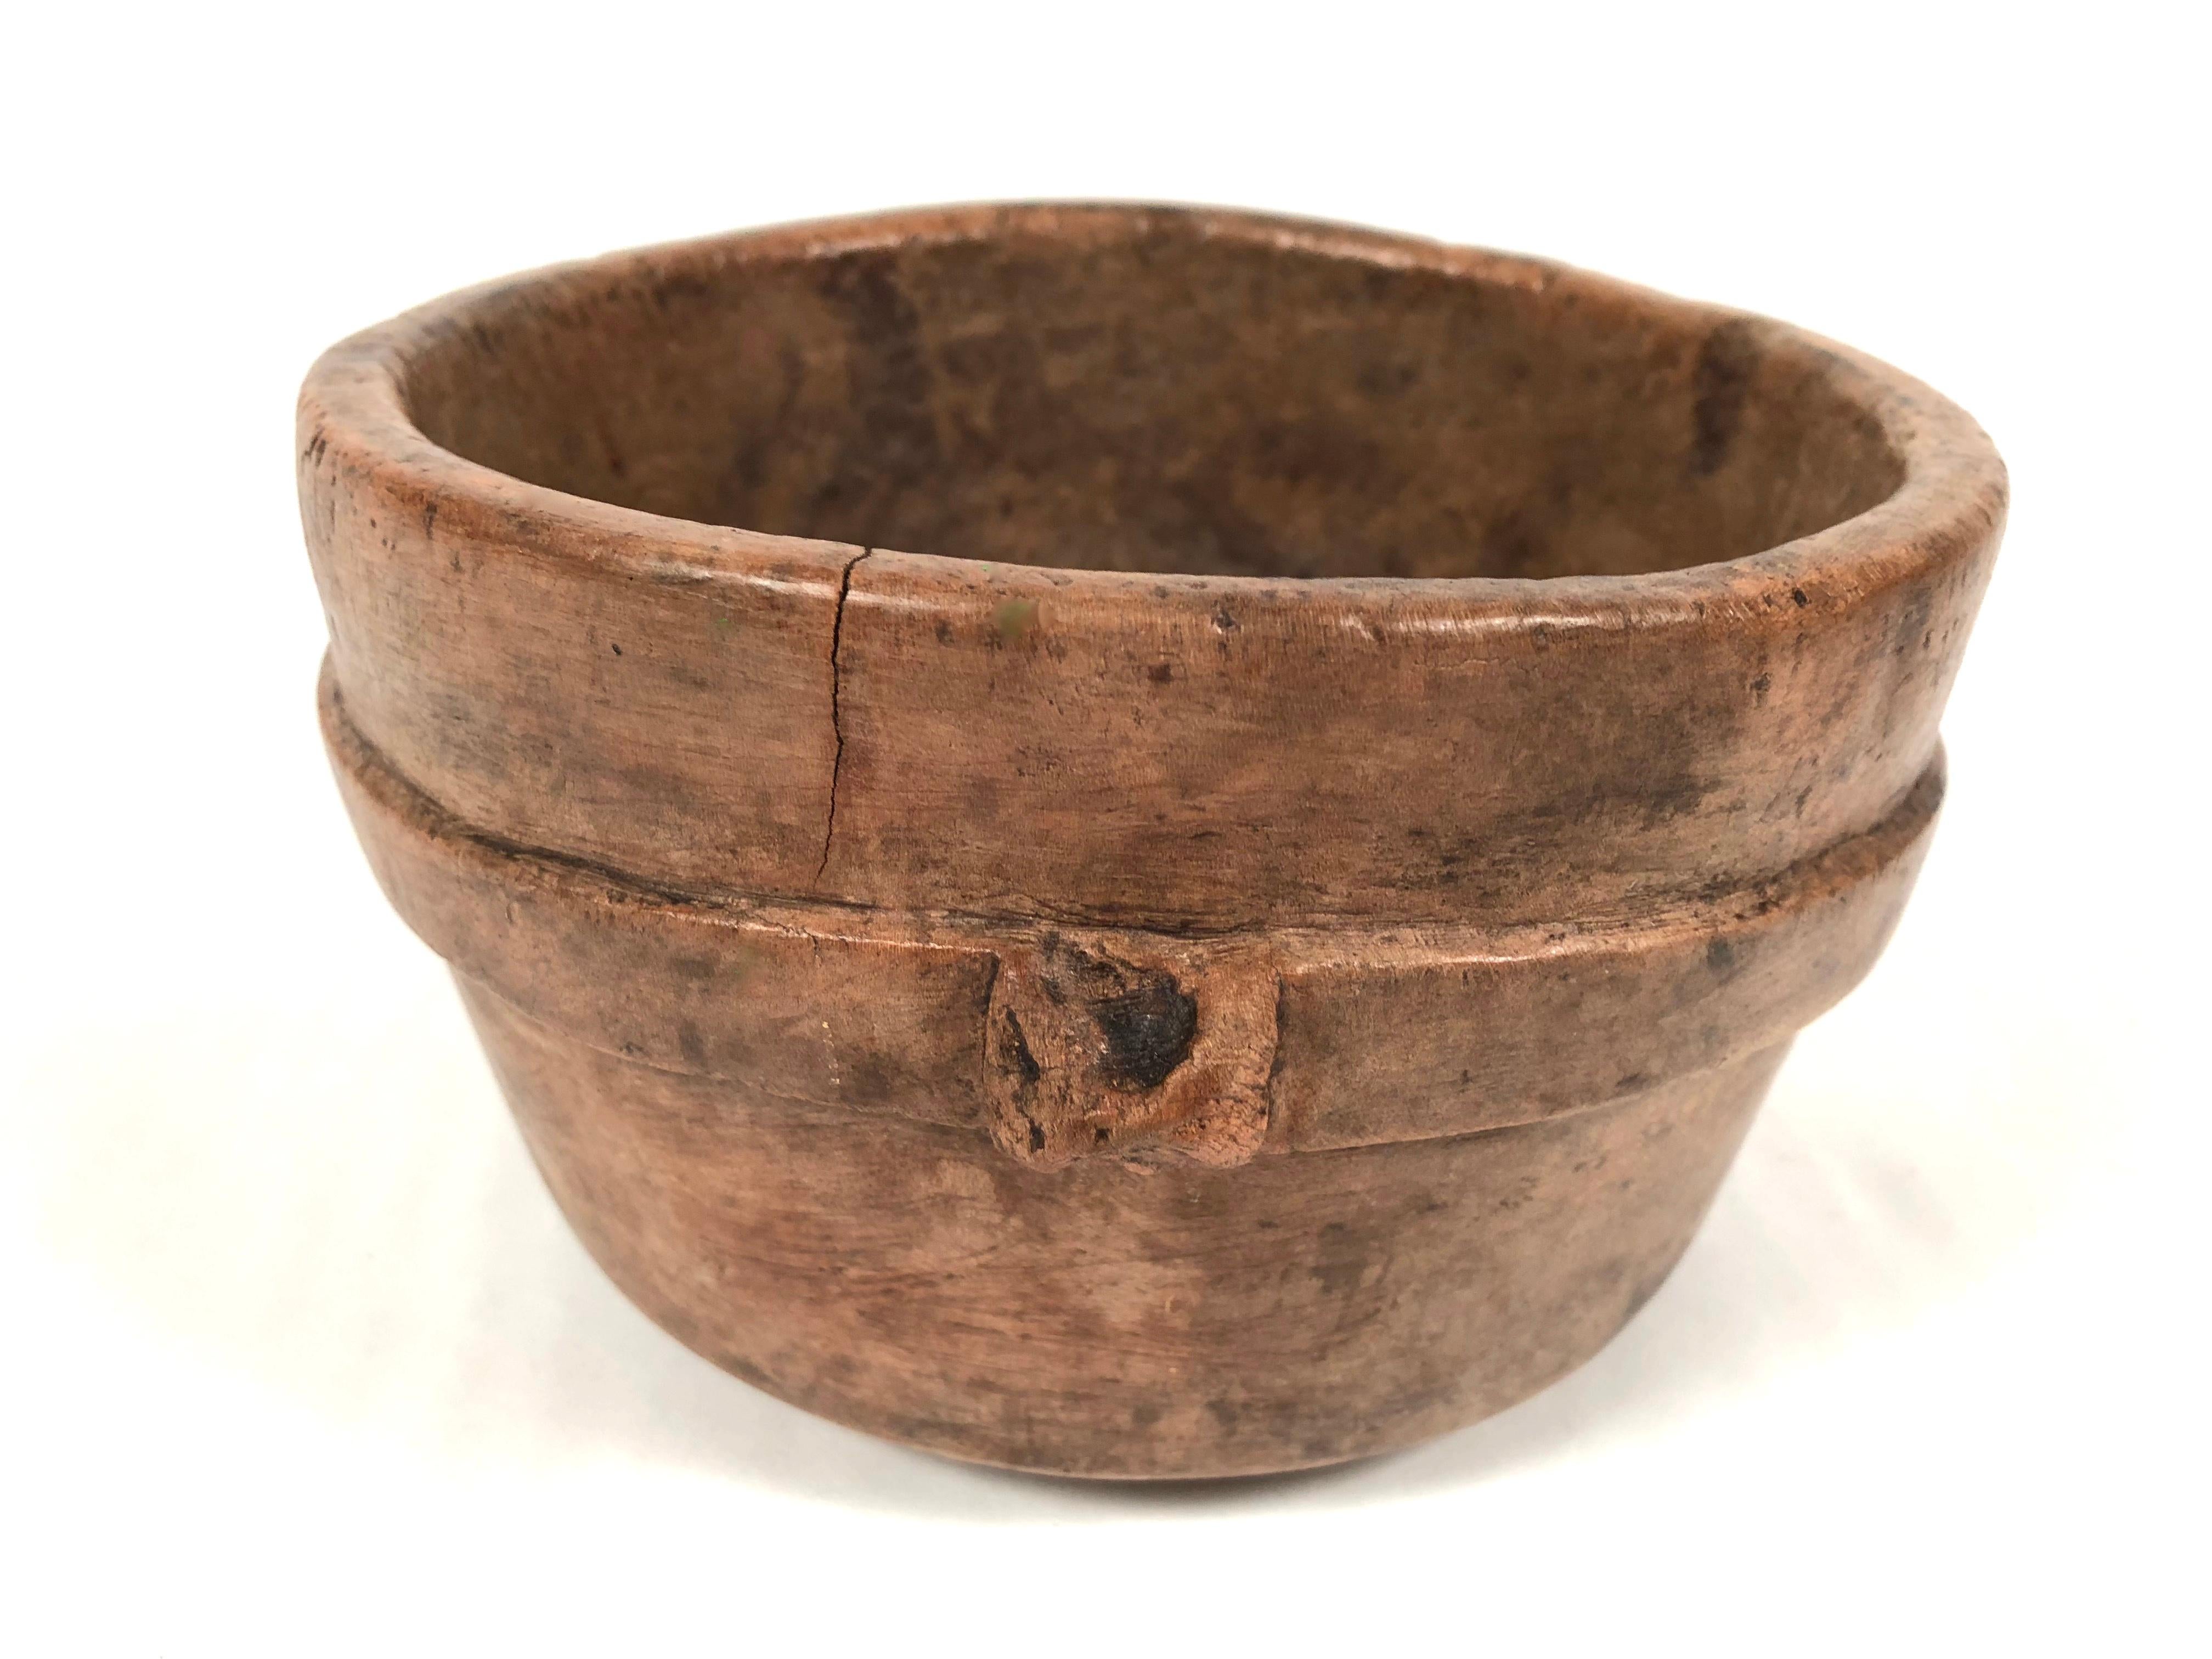 Early Primitive Carved Wood Bowl (Handgeschnitzt)